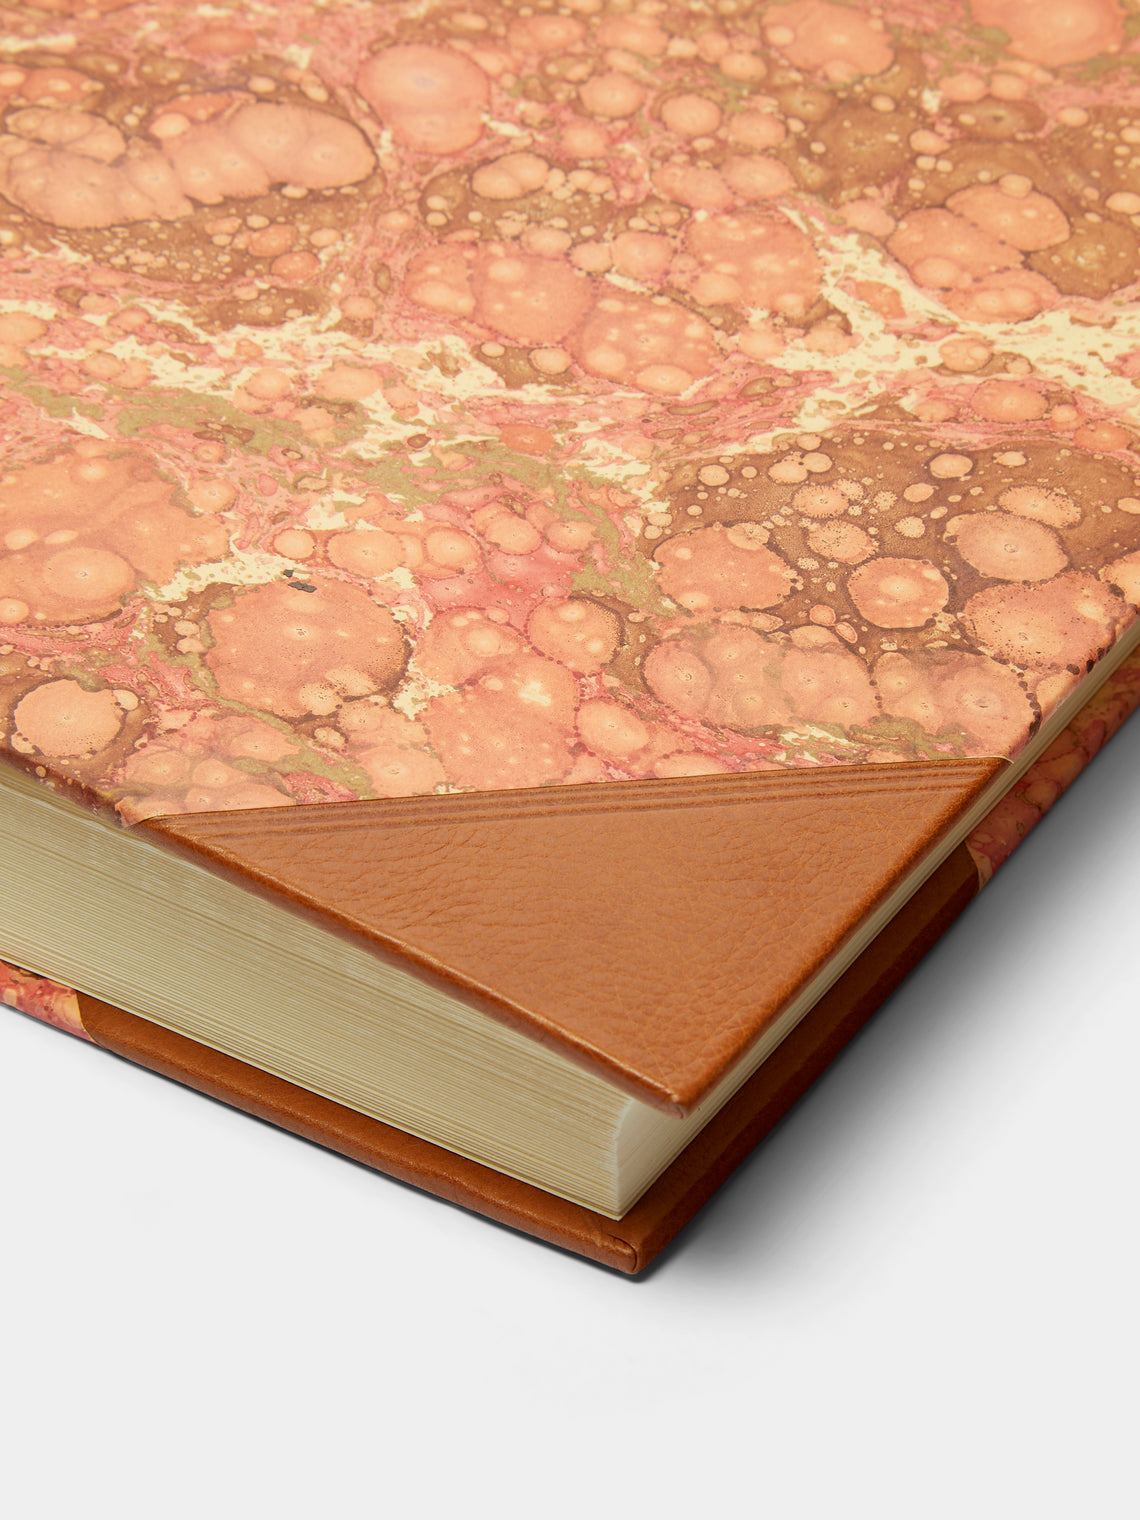 Giannini Firenze - Hand-Marbled Leather Bound Photo Album (35cm x 35cm) - Pink - ABASK